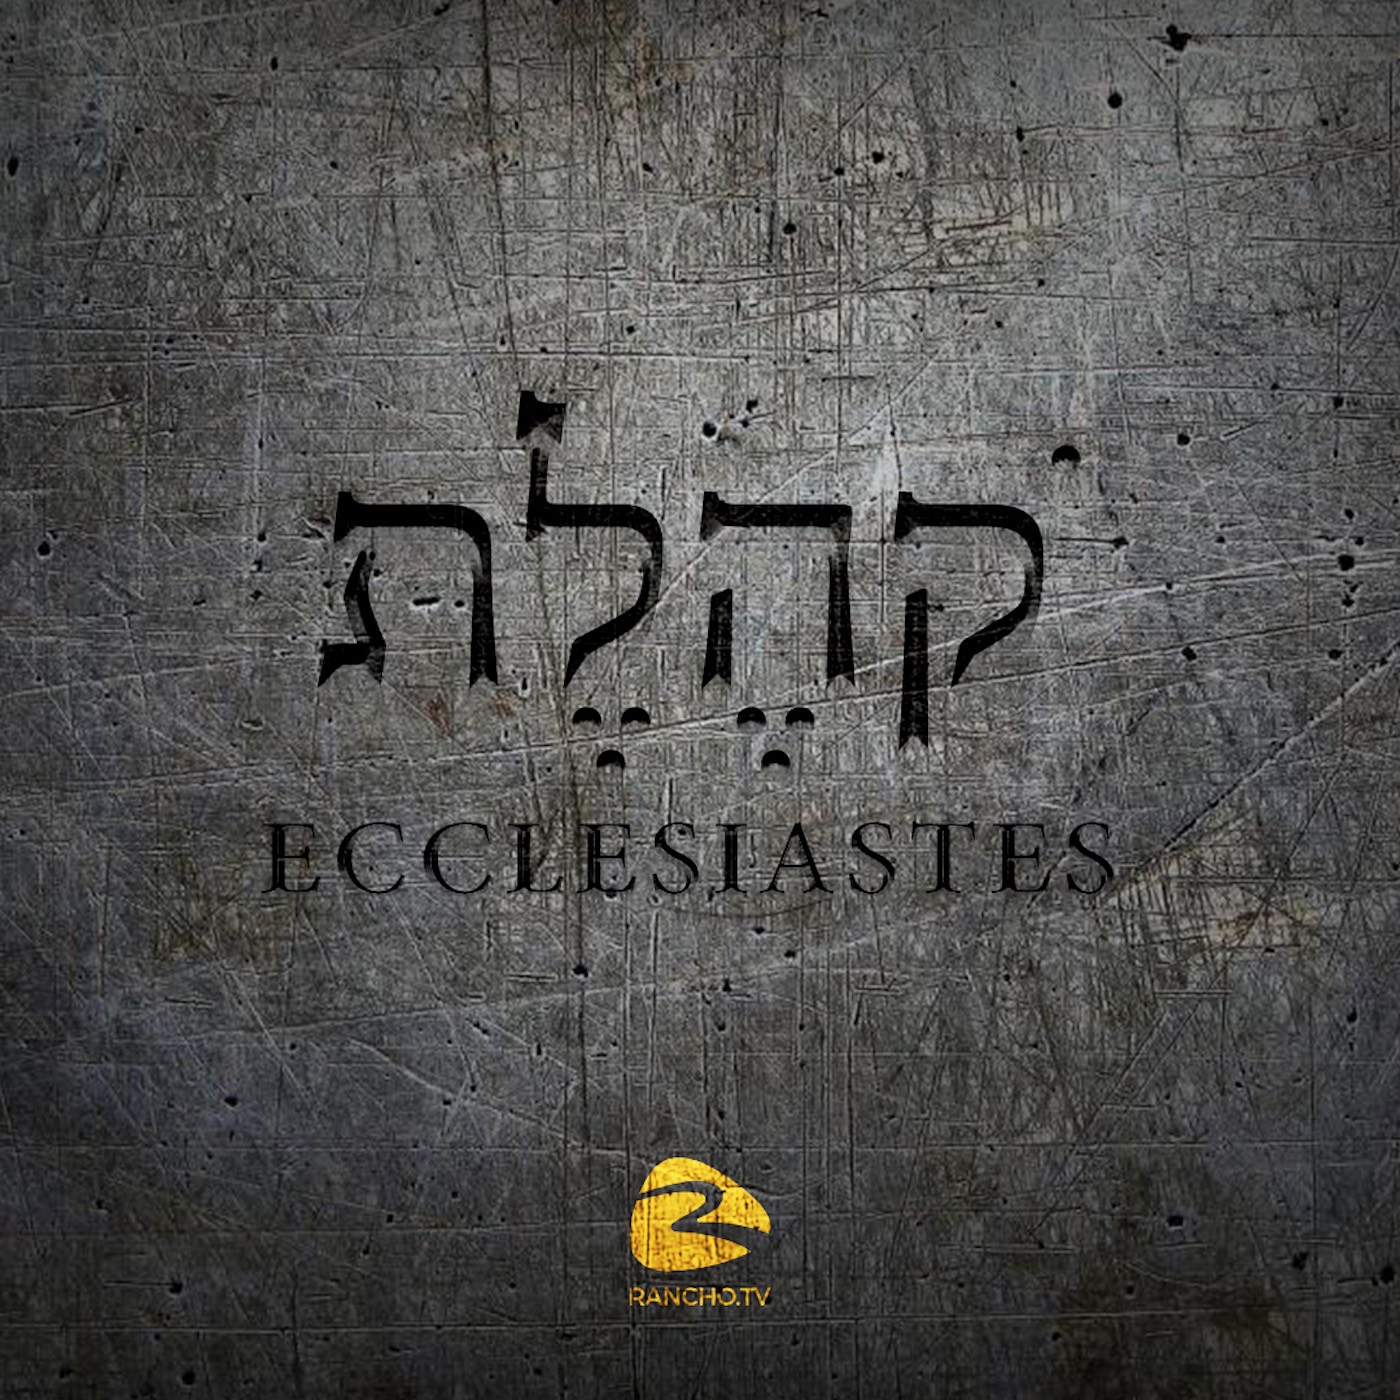 Ecclesiastes: The Search for Meaning - Week 2